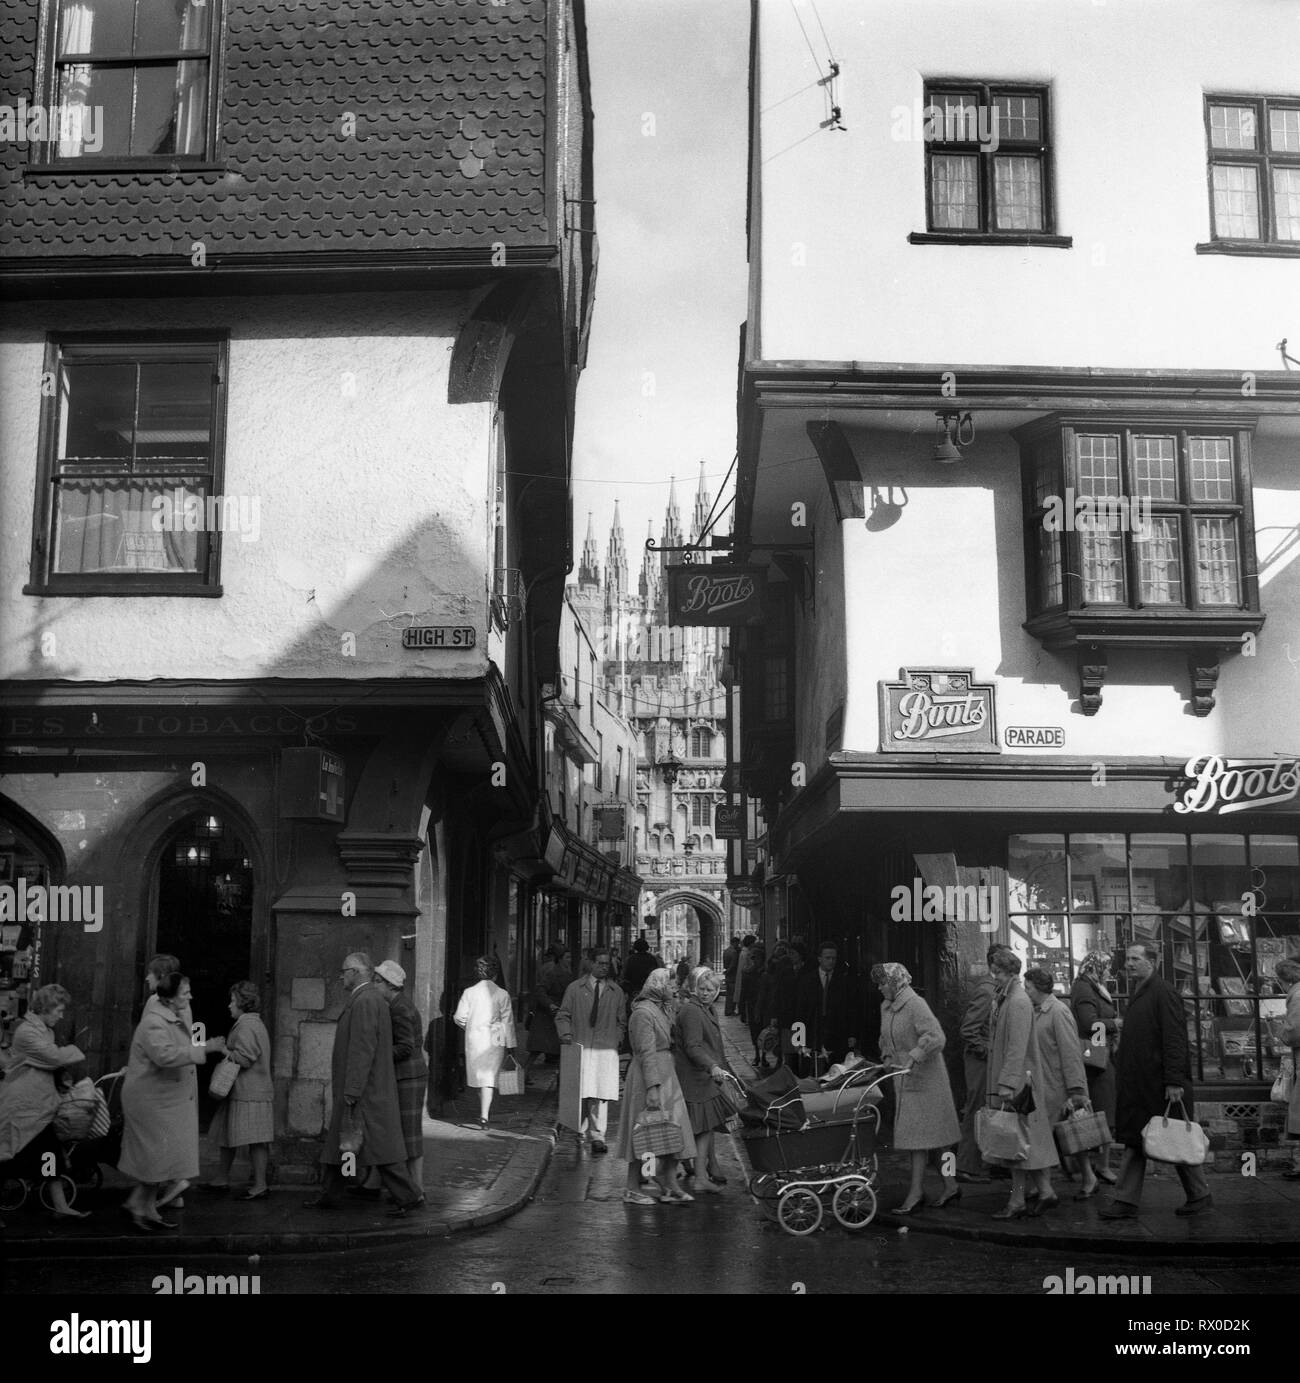 The city of Canterbury in England Uk in 1962 at the junction of High Street, Mercery Lane and Parade Stock Photo